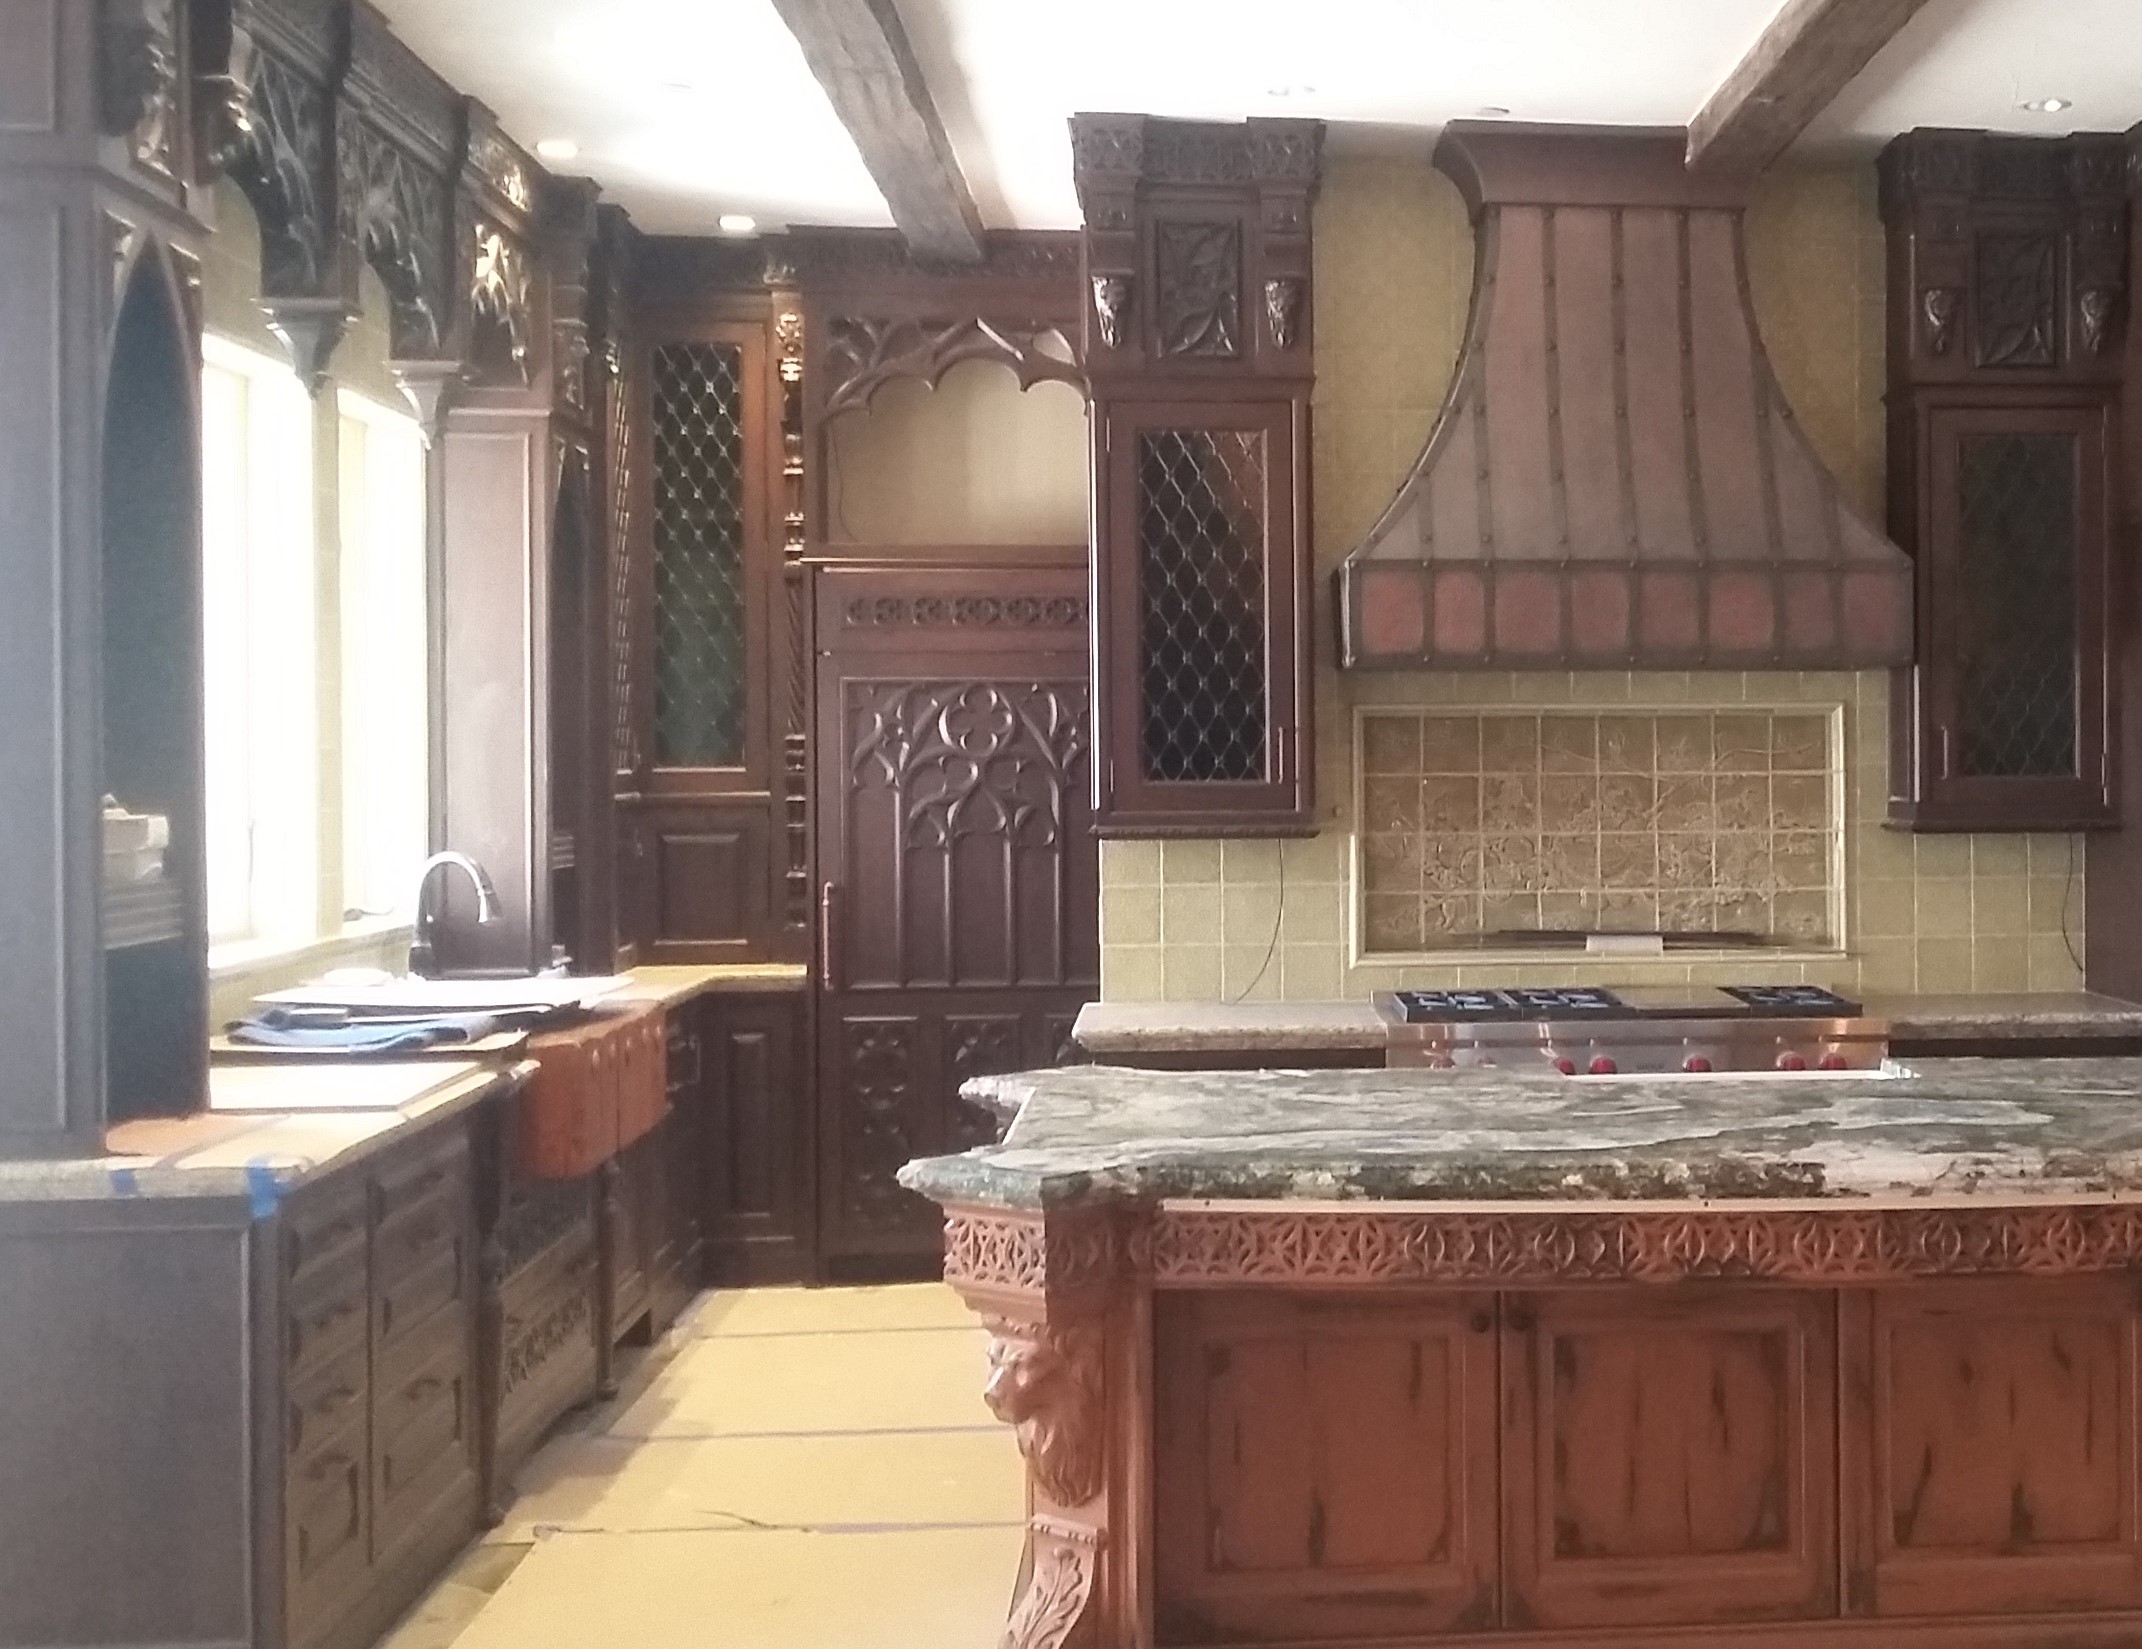 Custom, Old World Bronze Copper Hood with Straps & Rivets in Historic Kitchen